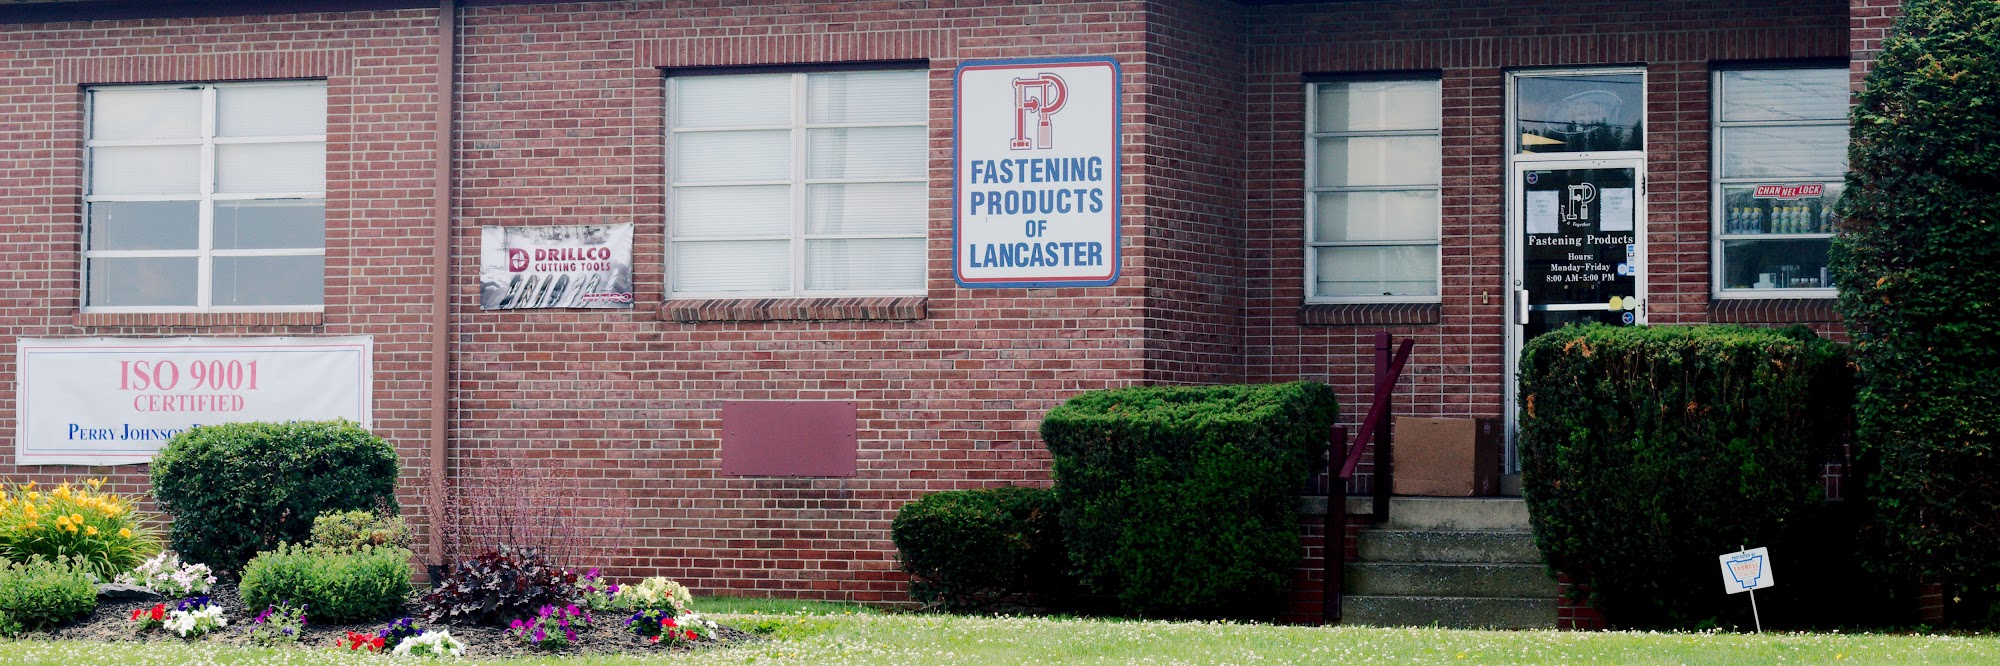 Fastening Products Of Lancaster